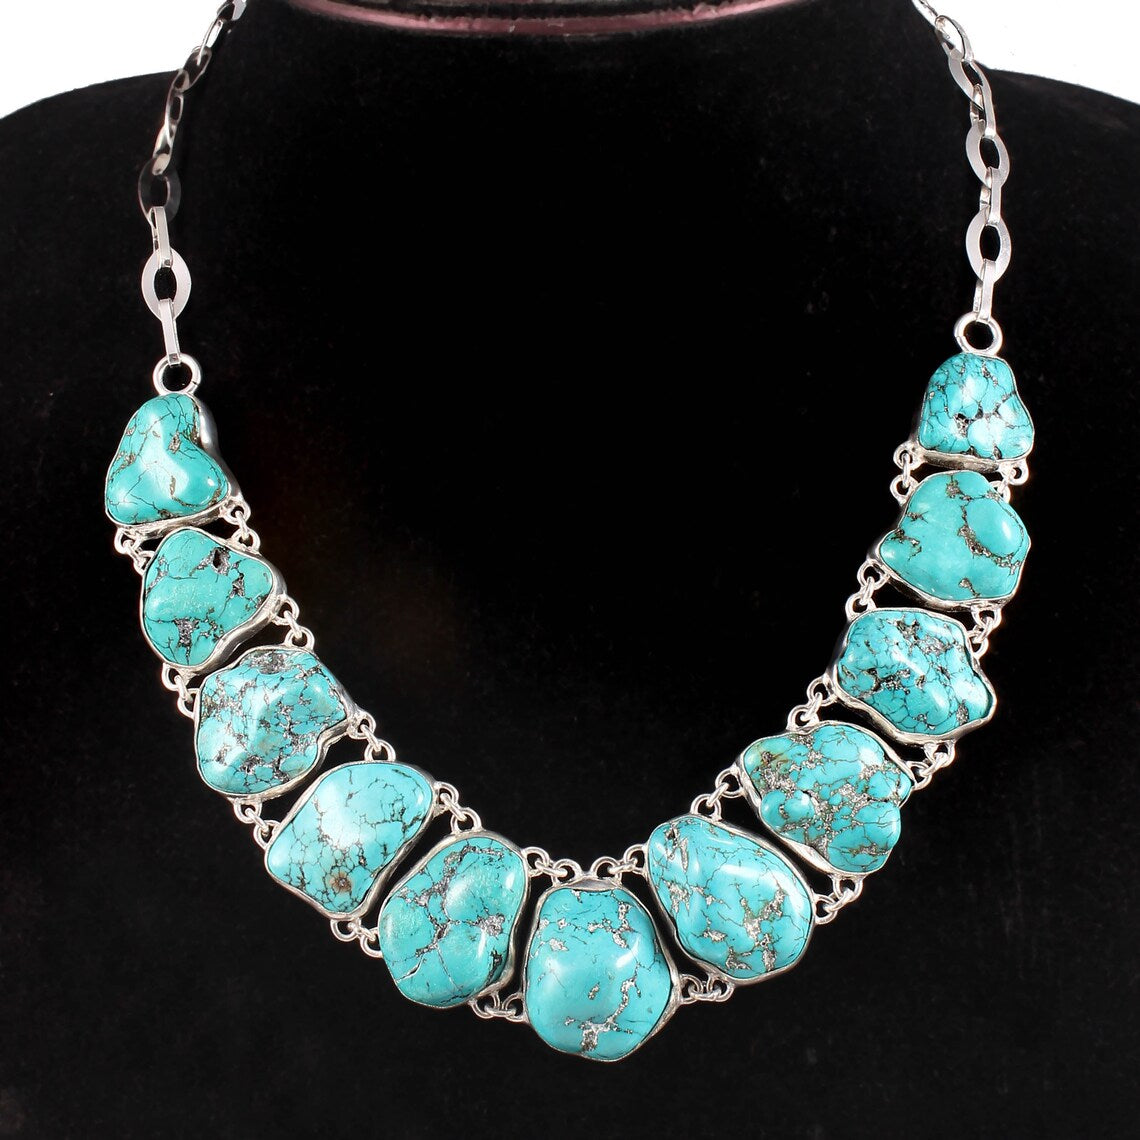 Raw Turquoise Bohemian Choker Necklace For Women - 925 Solid Sterling Silver Necklace